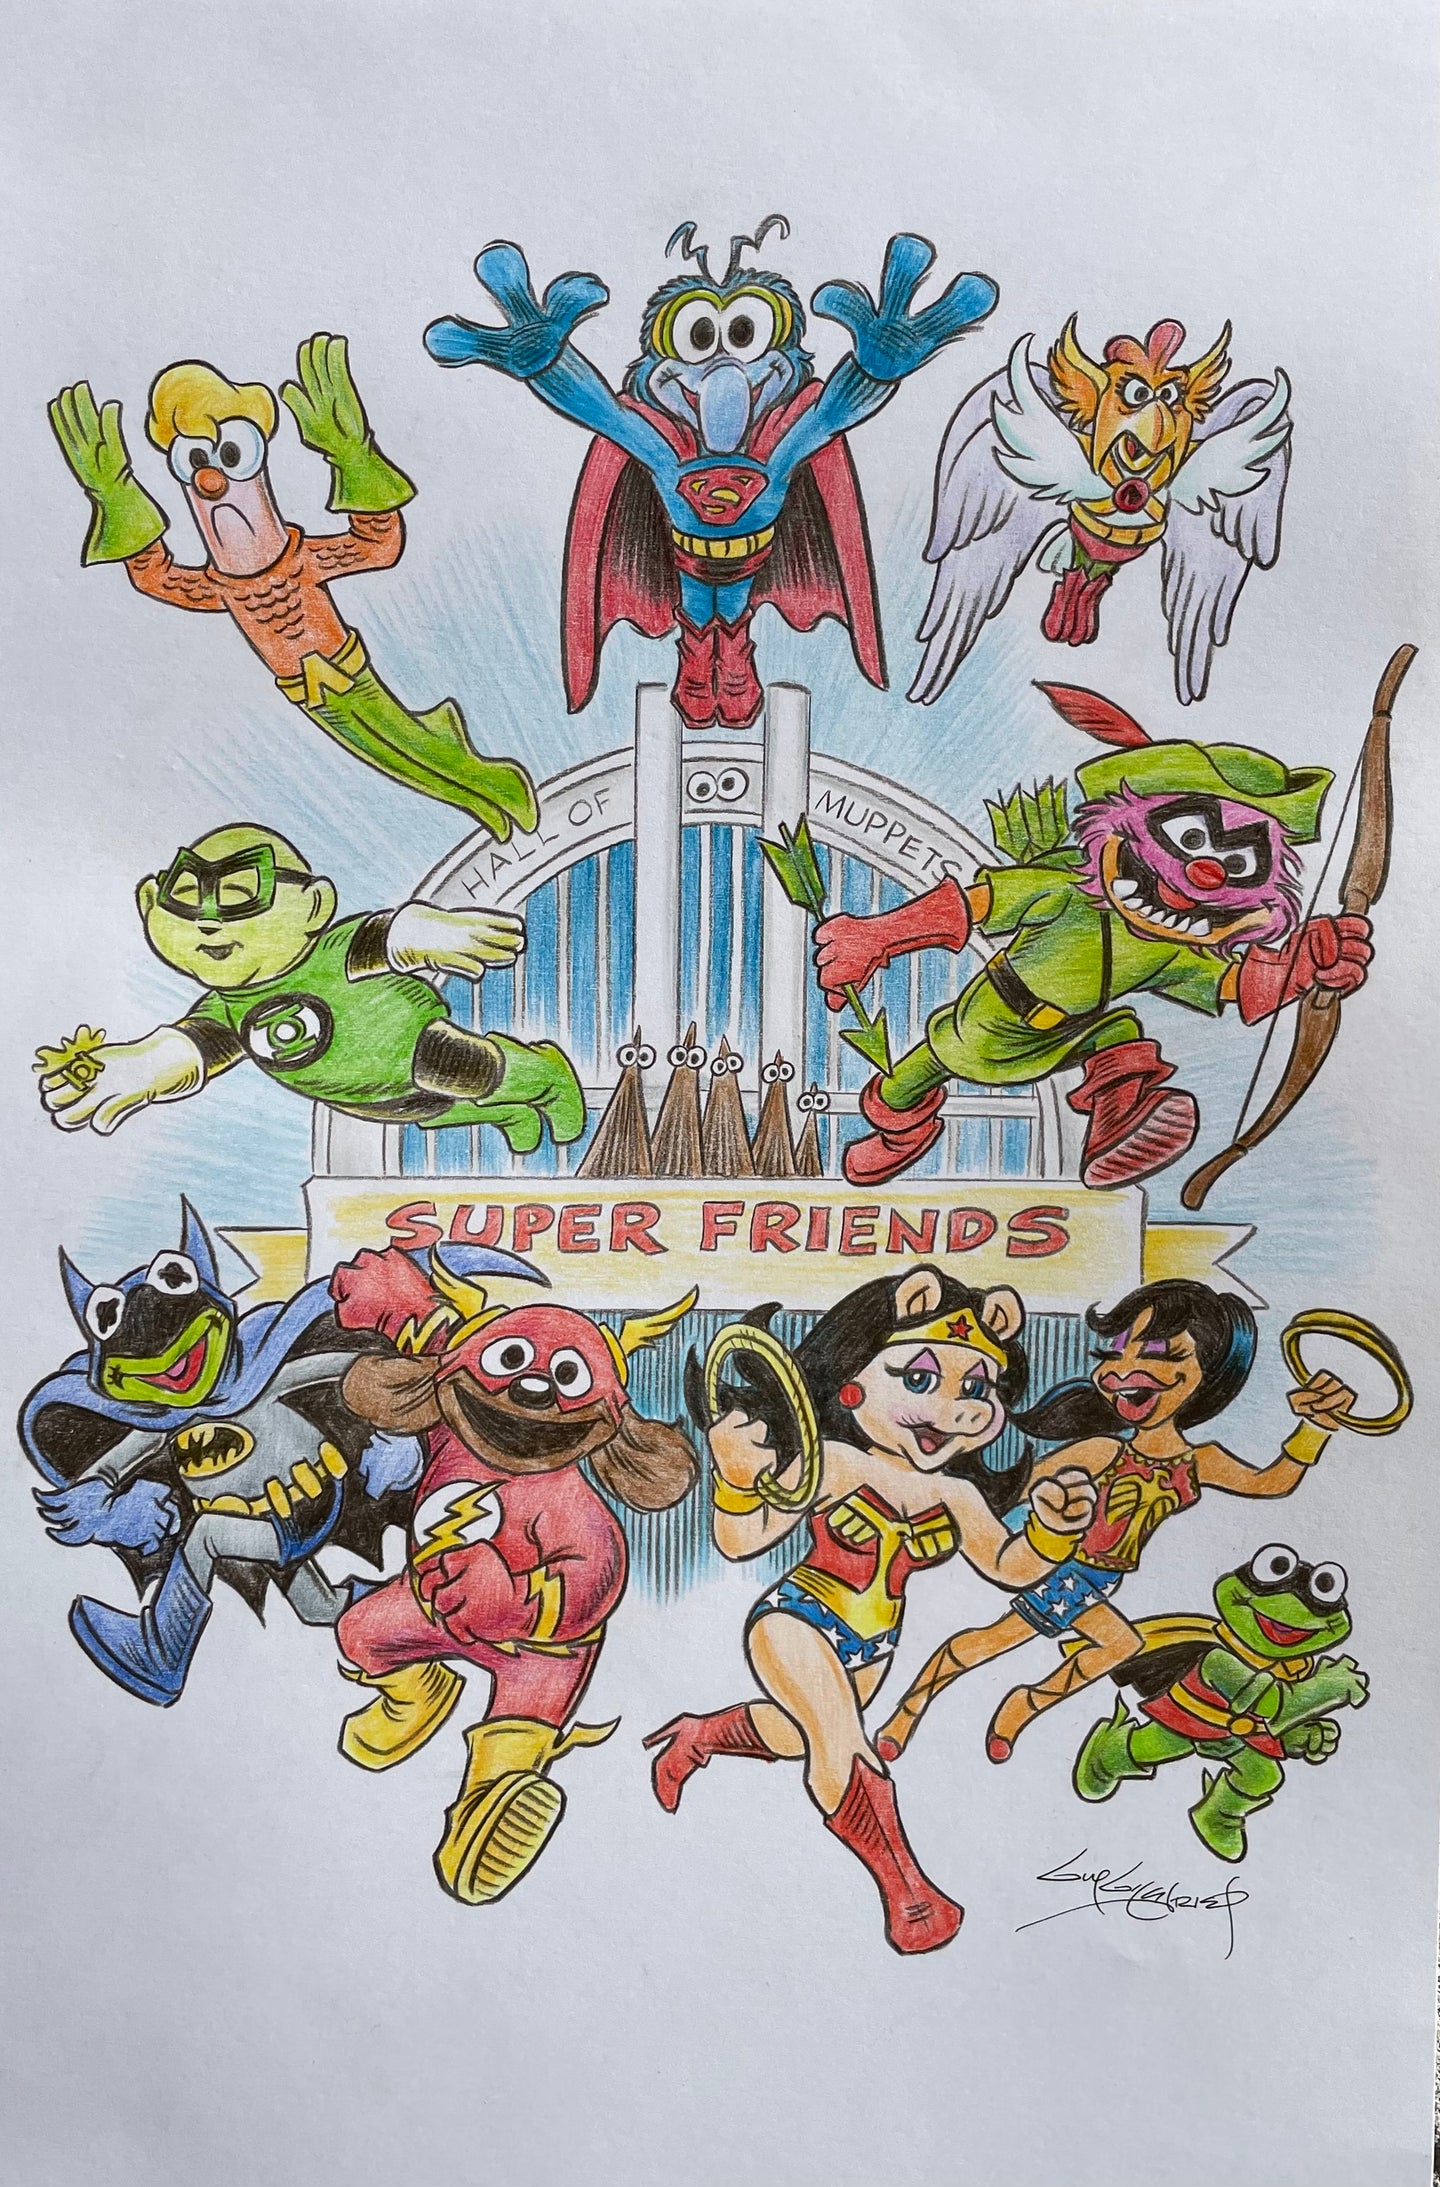 Muppets (as the Super Friends) 11x17 Art Print - Created by Guy Gilchrist